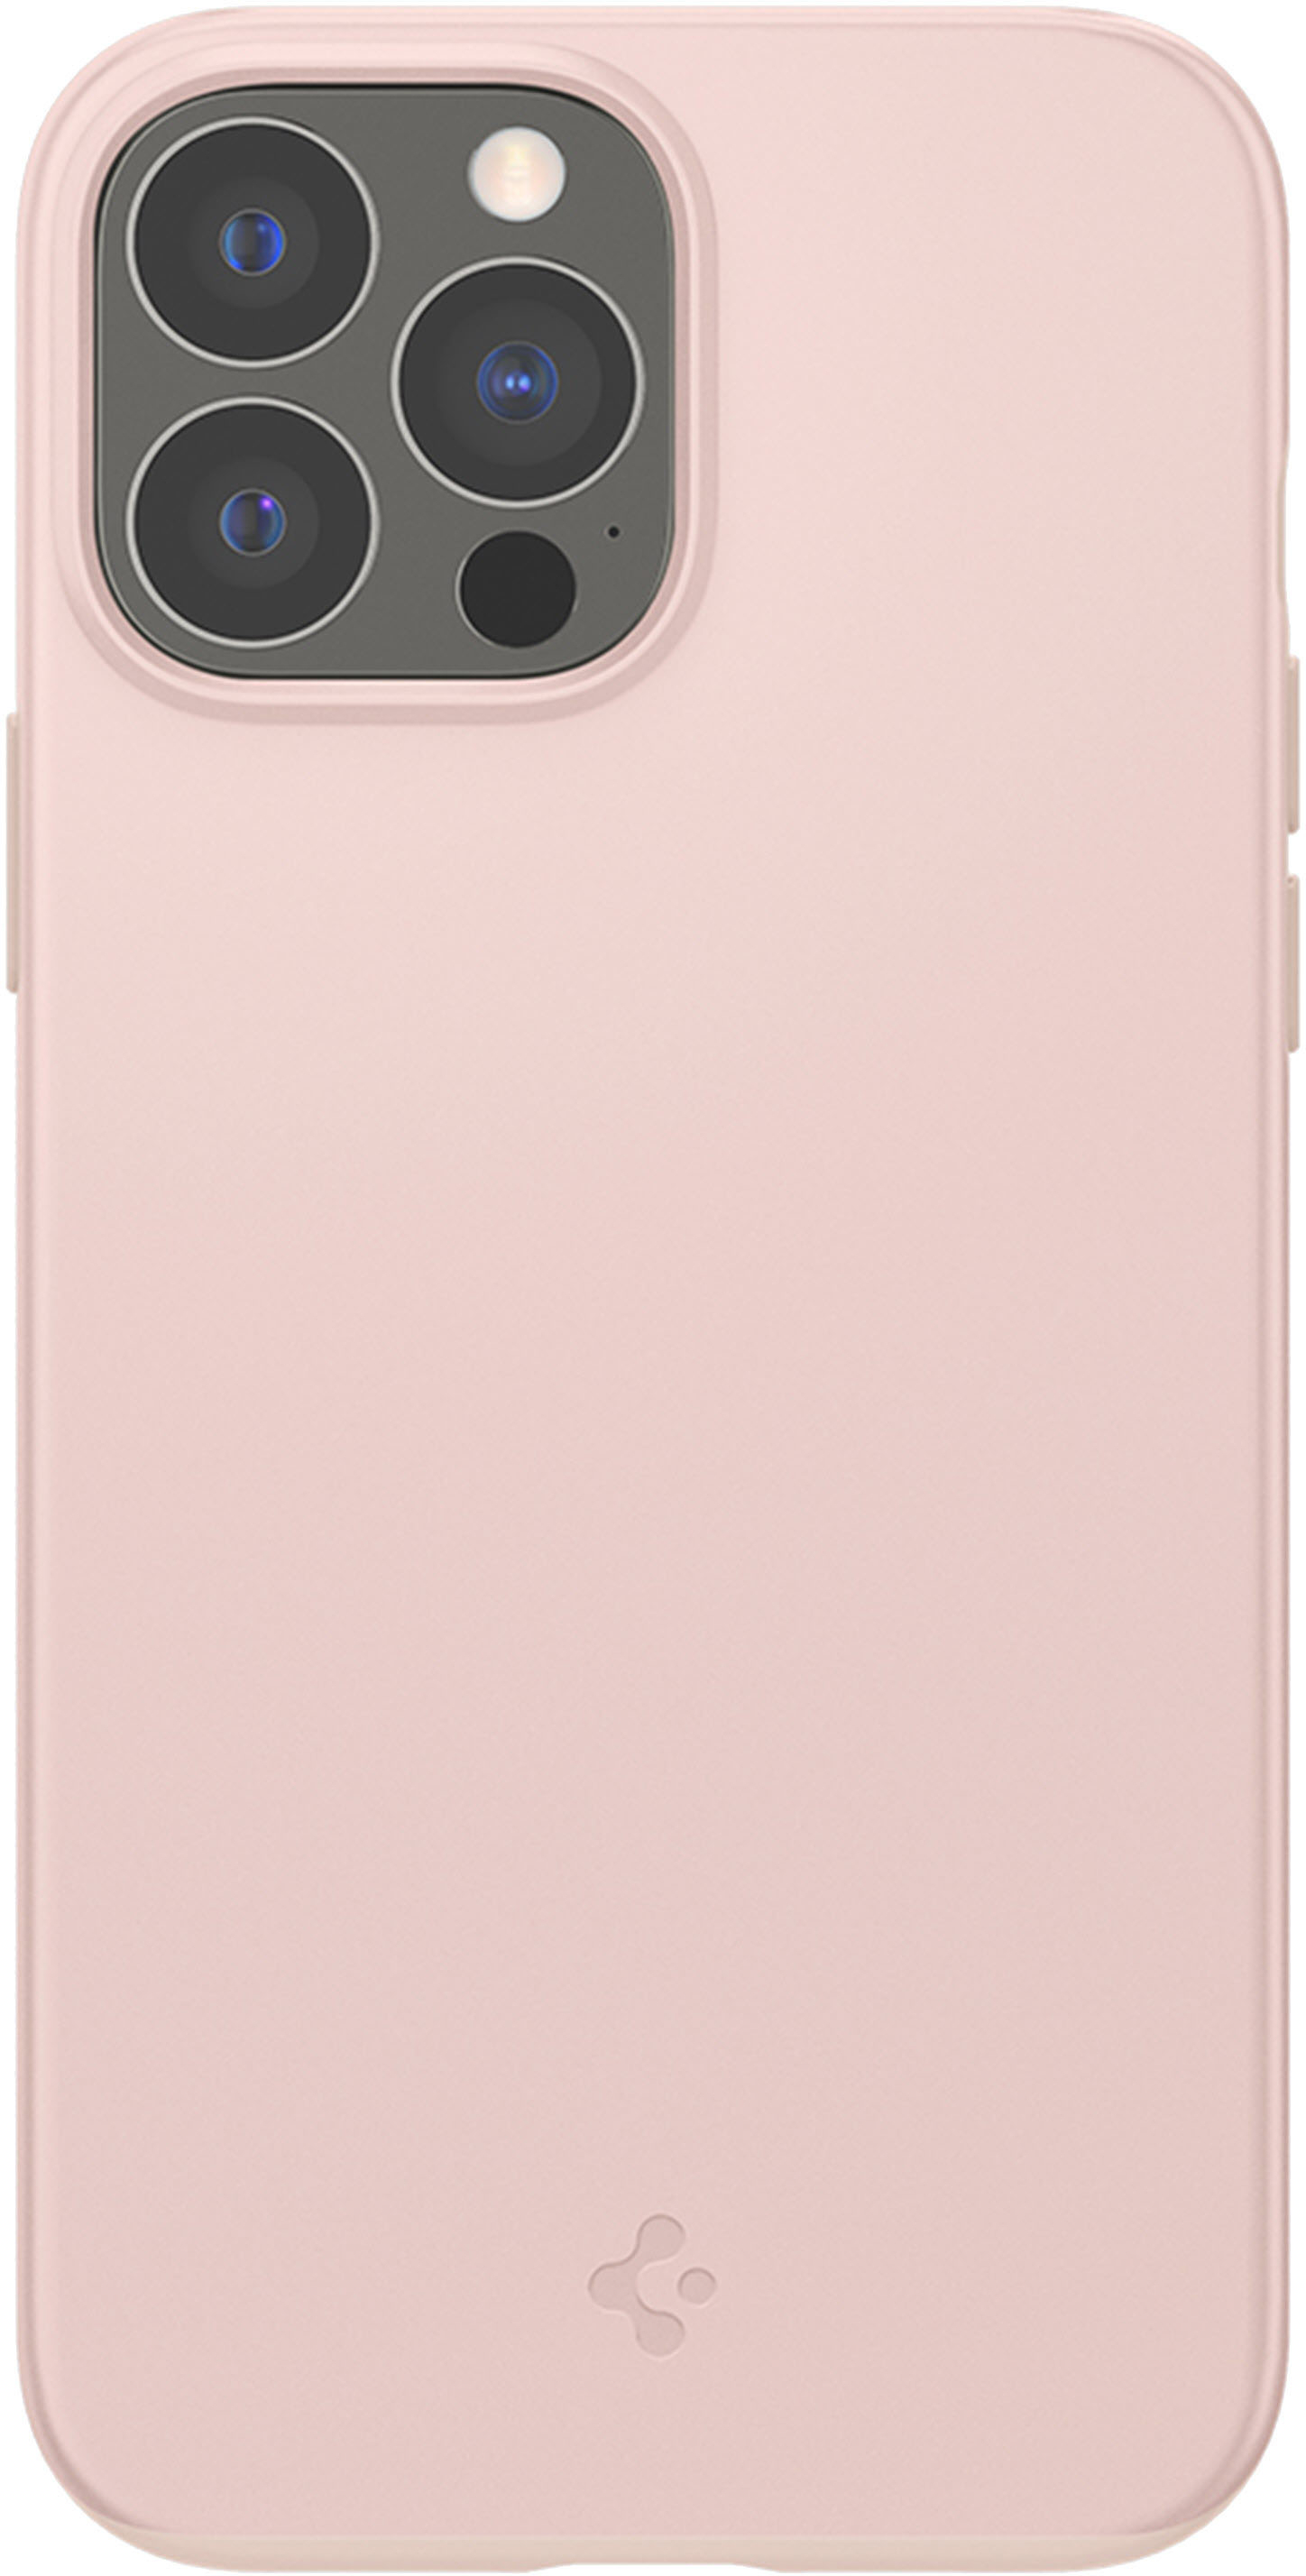 Spigen - Thin Fit Hard Shell Case for Apple iPhone 13 Pro Max & iPhone 12 Pro Max - Pink Sand